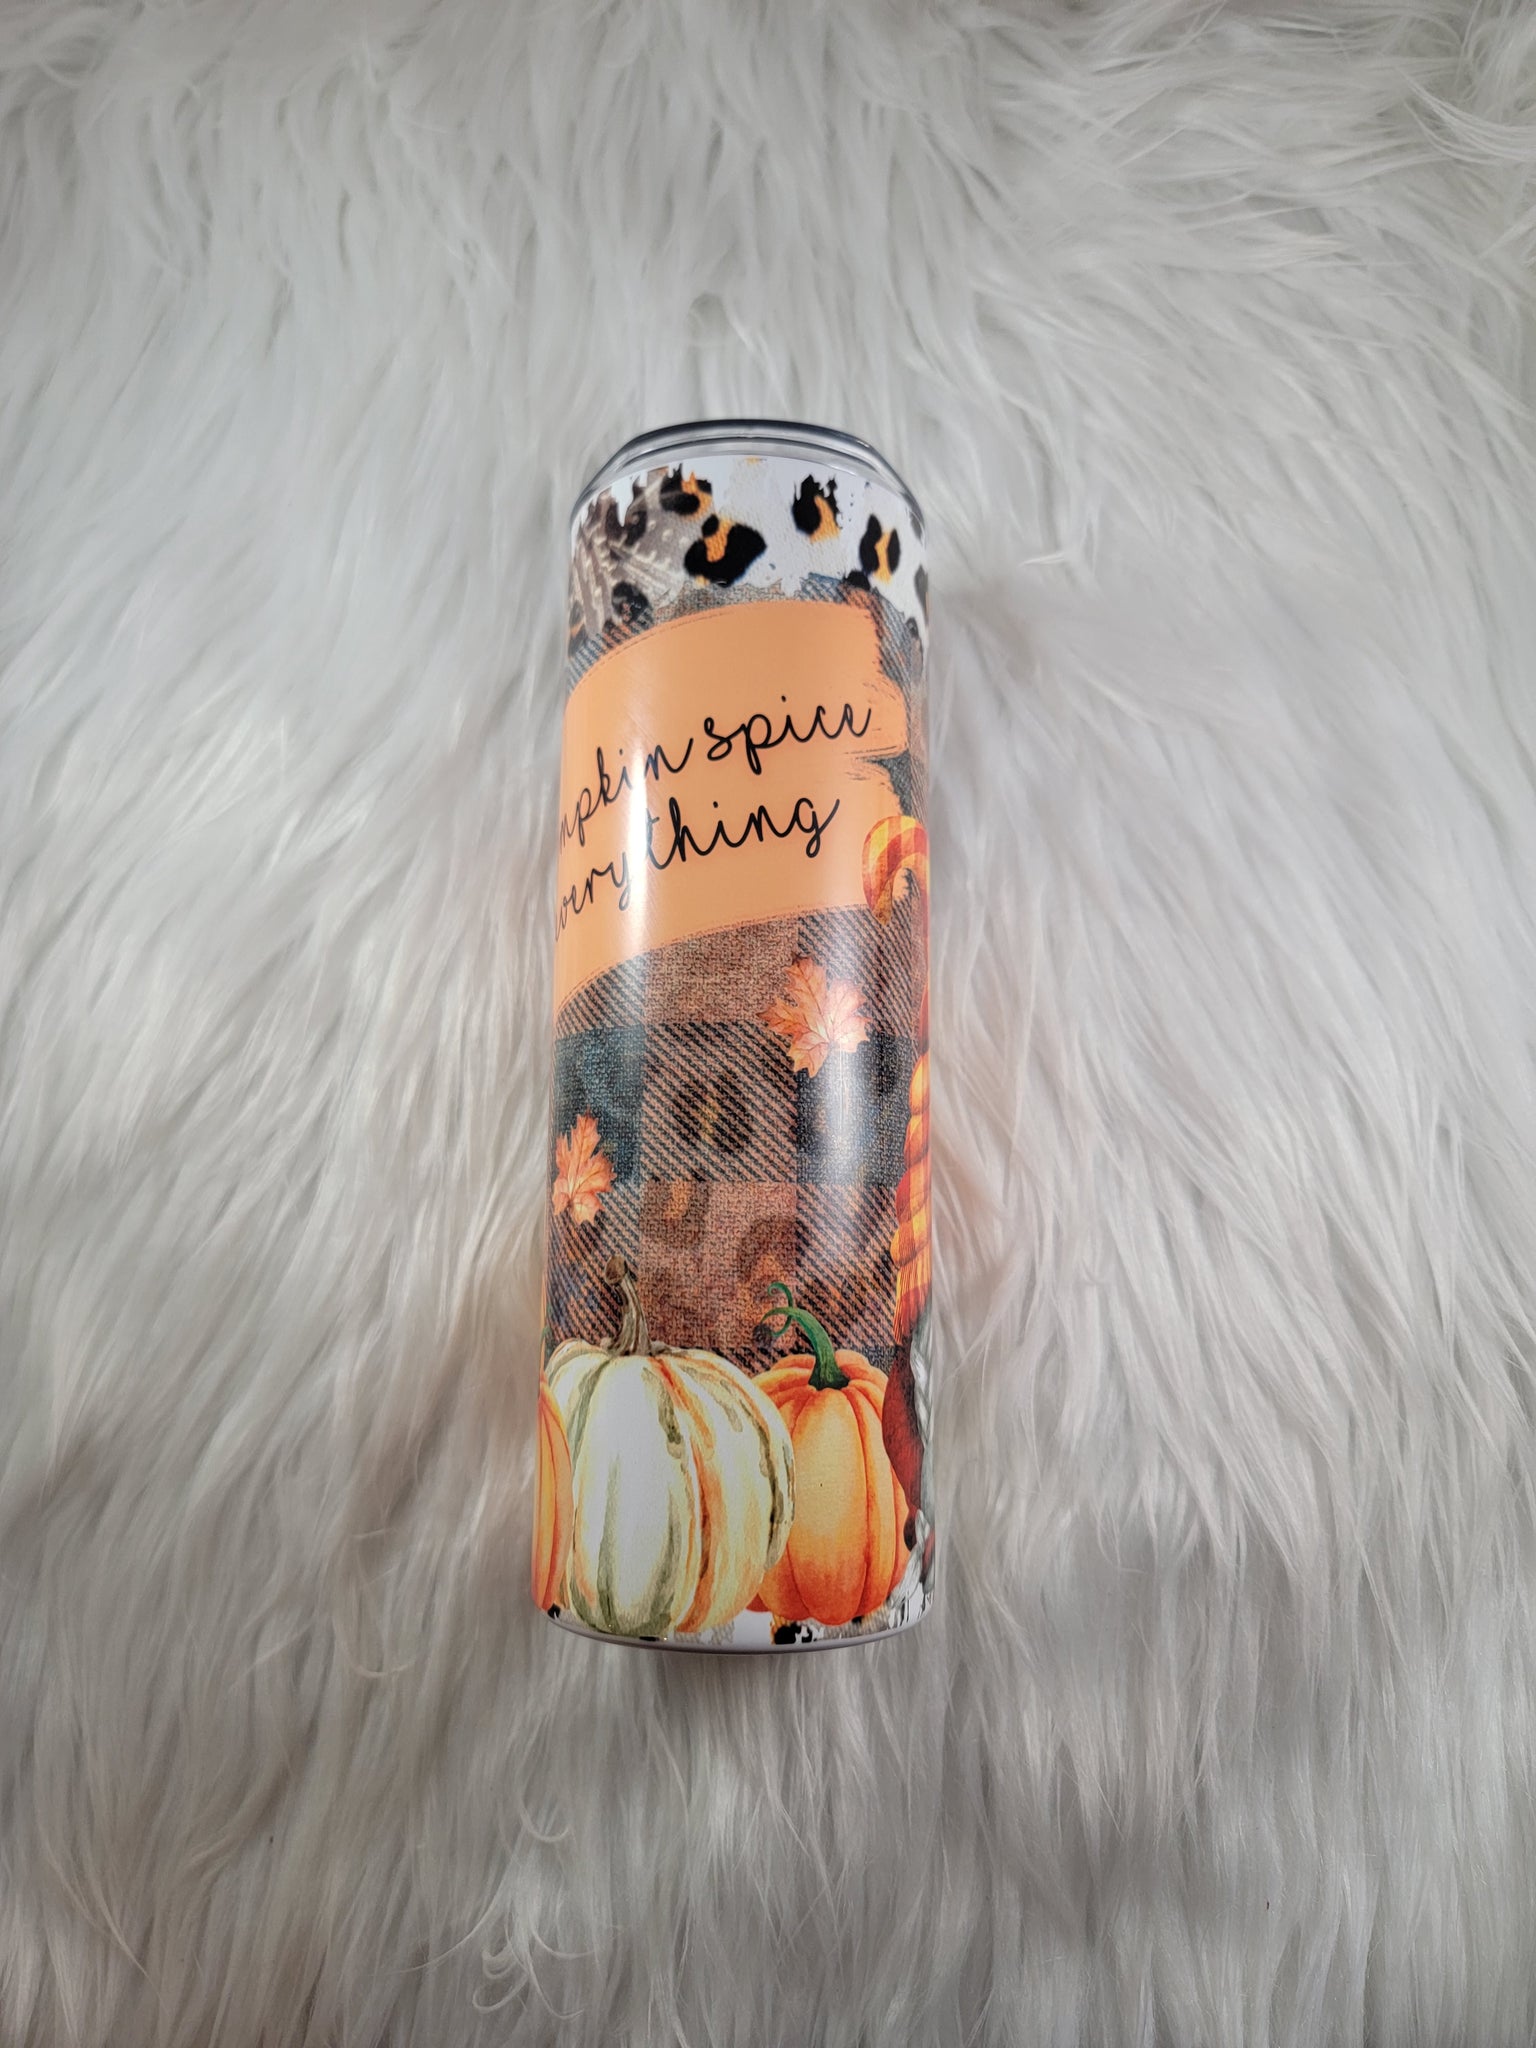 Pumpkin spice everything gnome tumbler